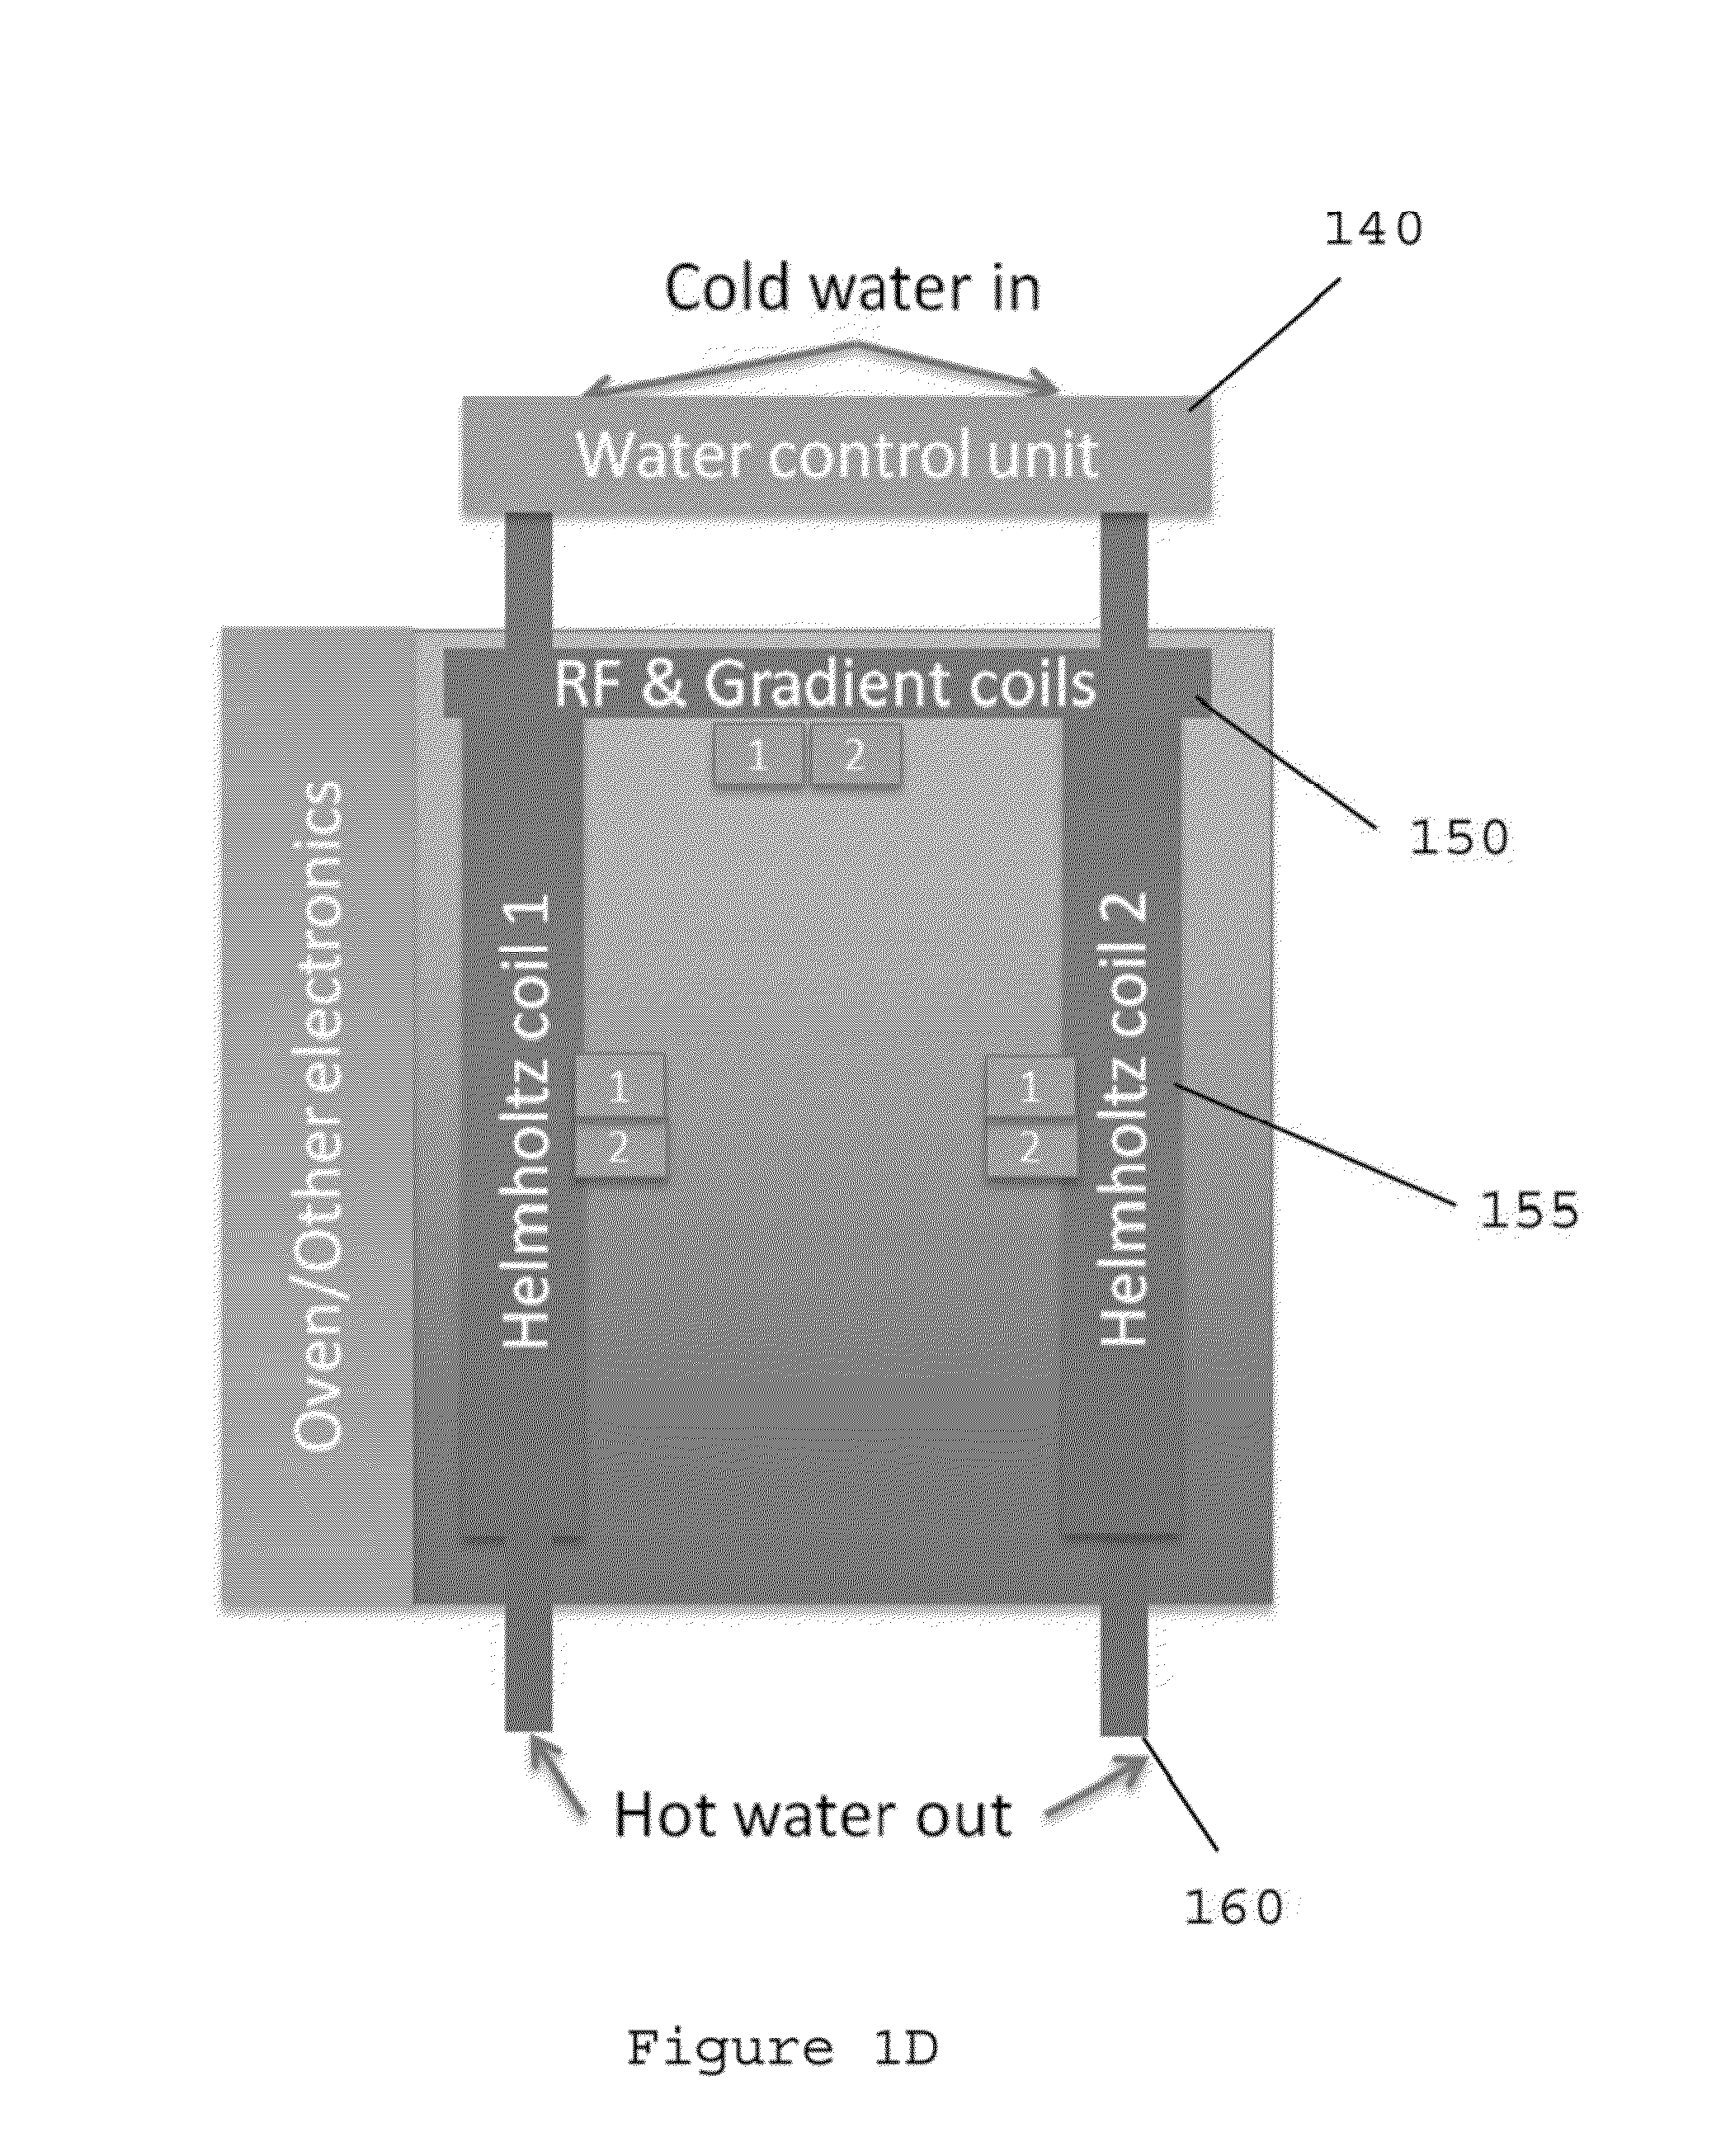 System and method for providing magnetic resonance temperature measurement for radiative heating applications